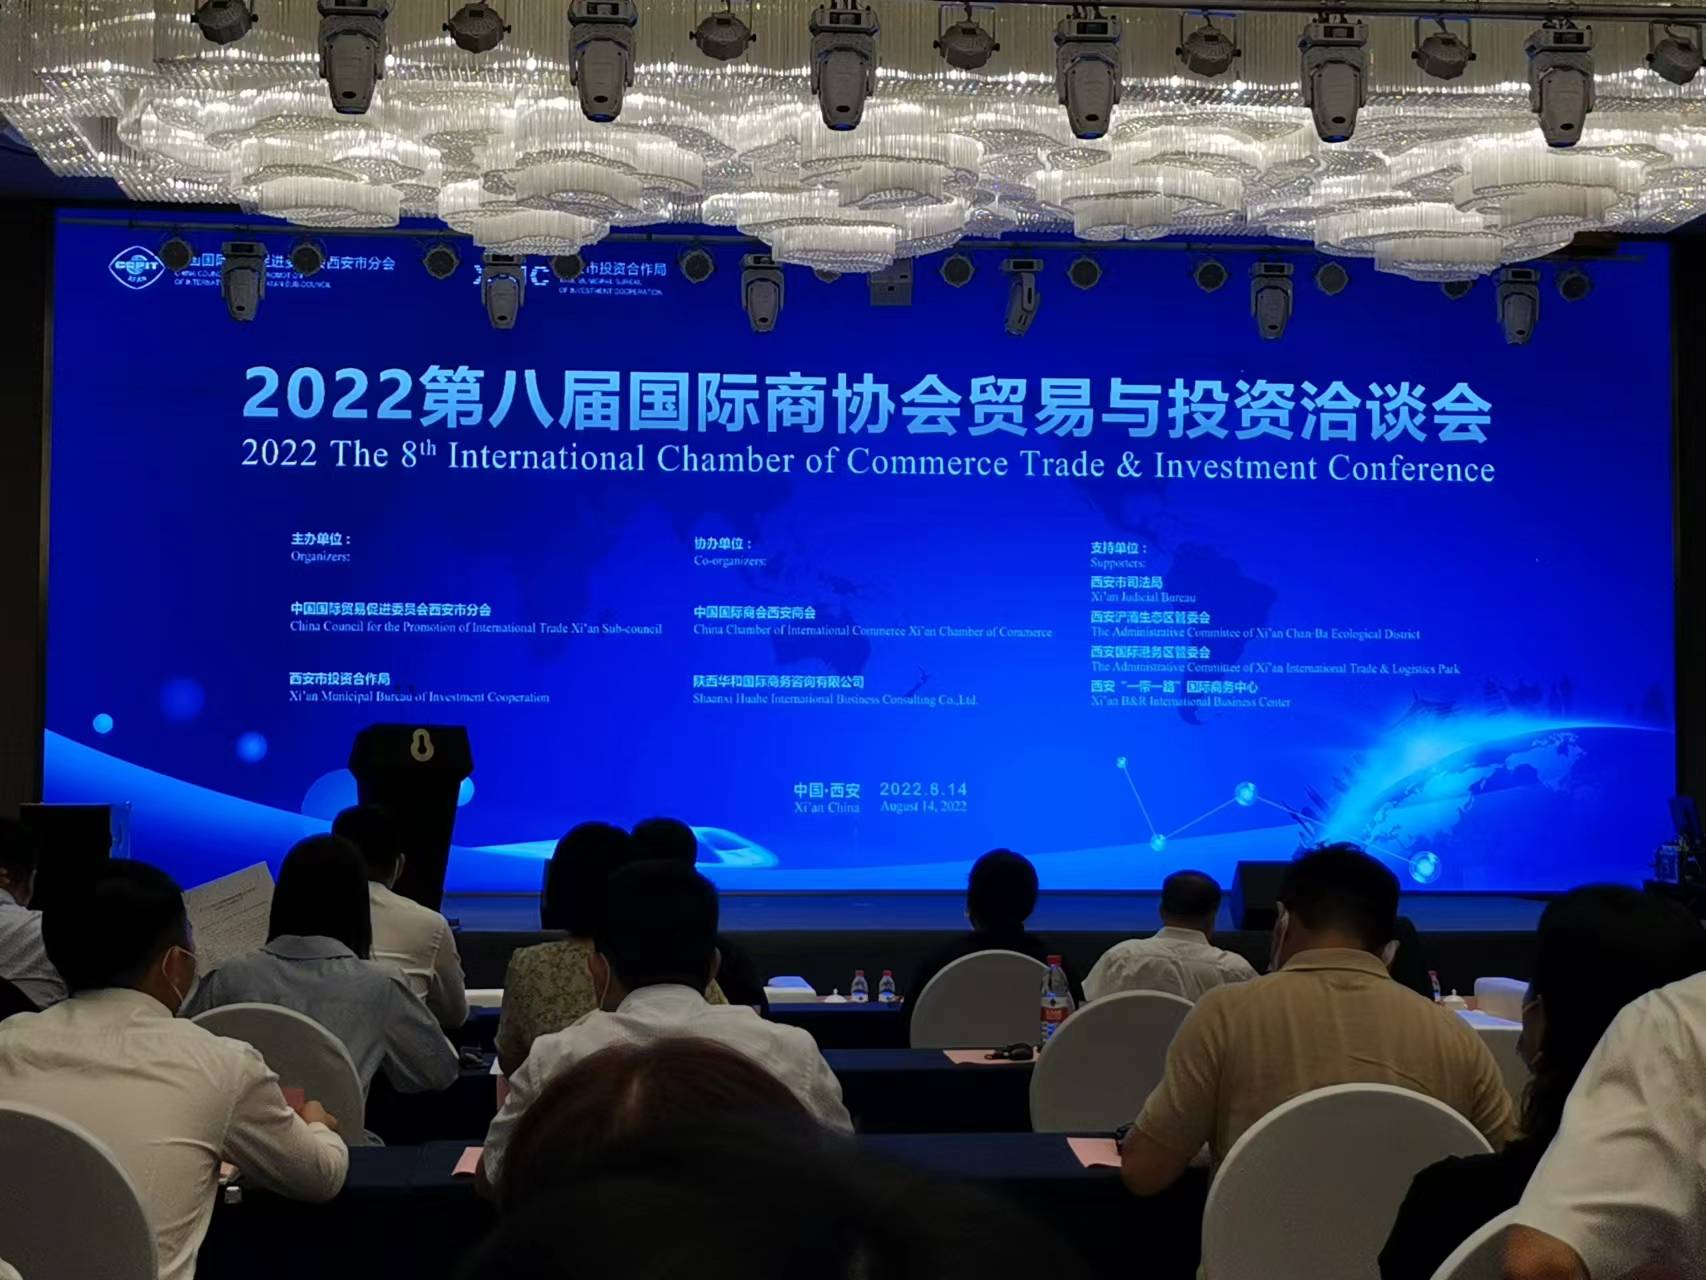 2022 the 8 th international Chamber of commerce trade &investment Conference